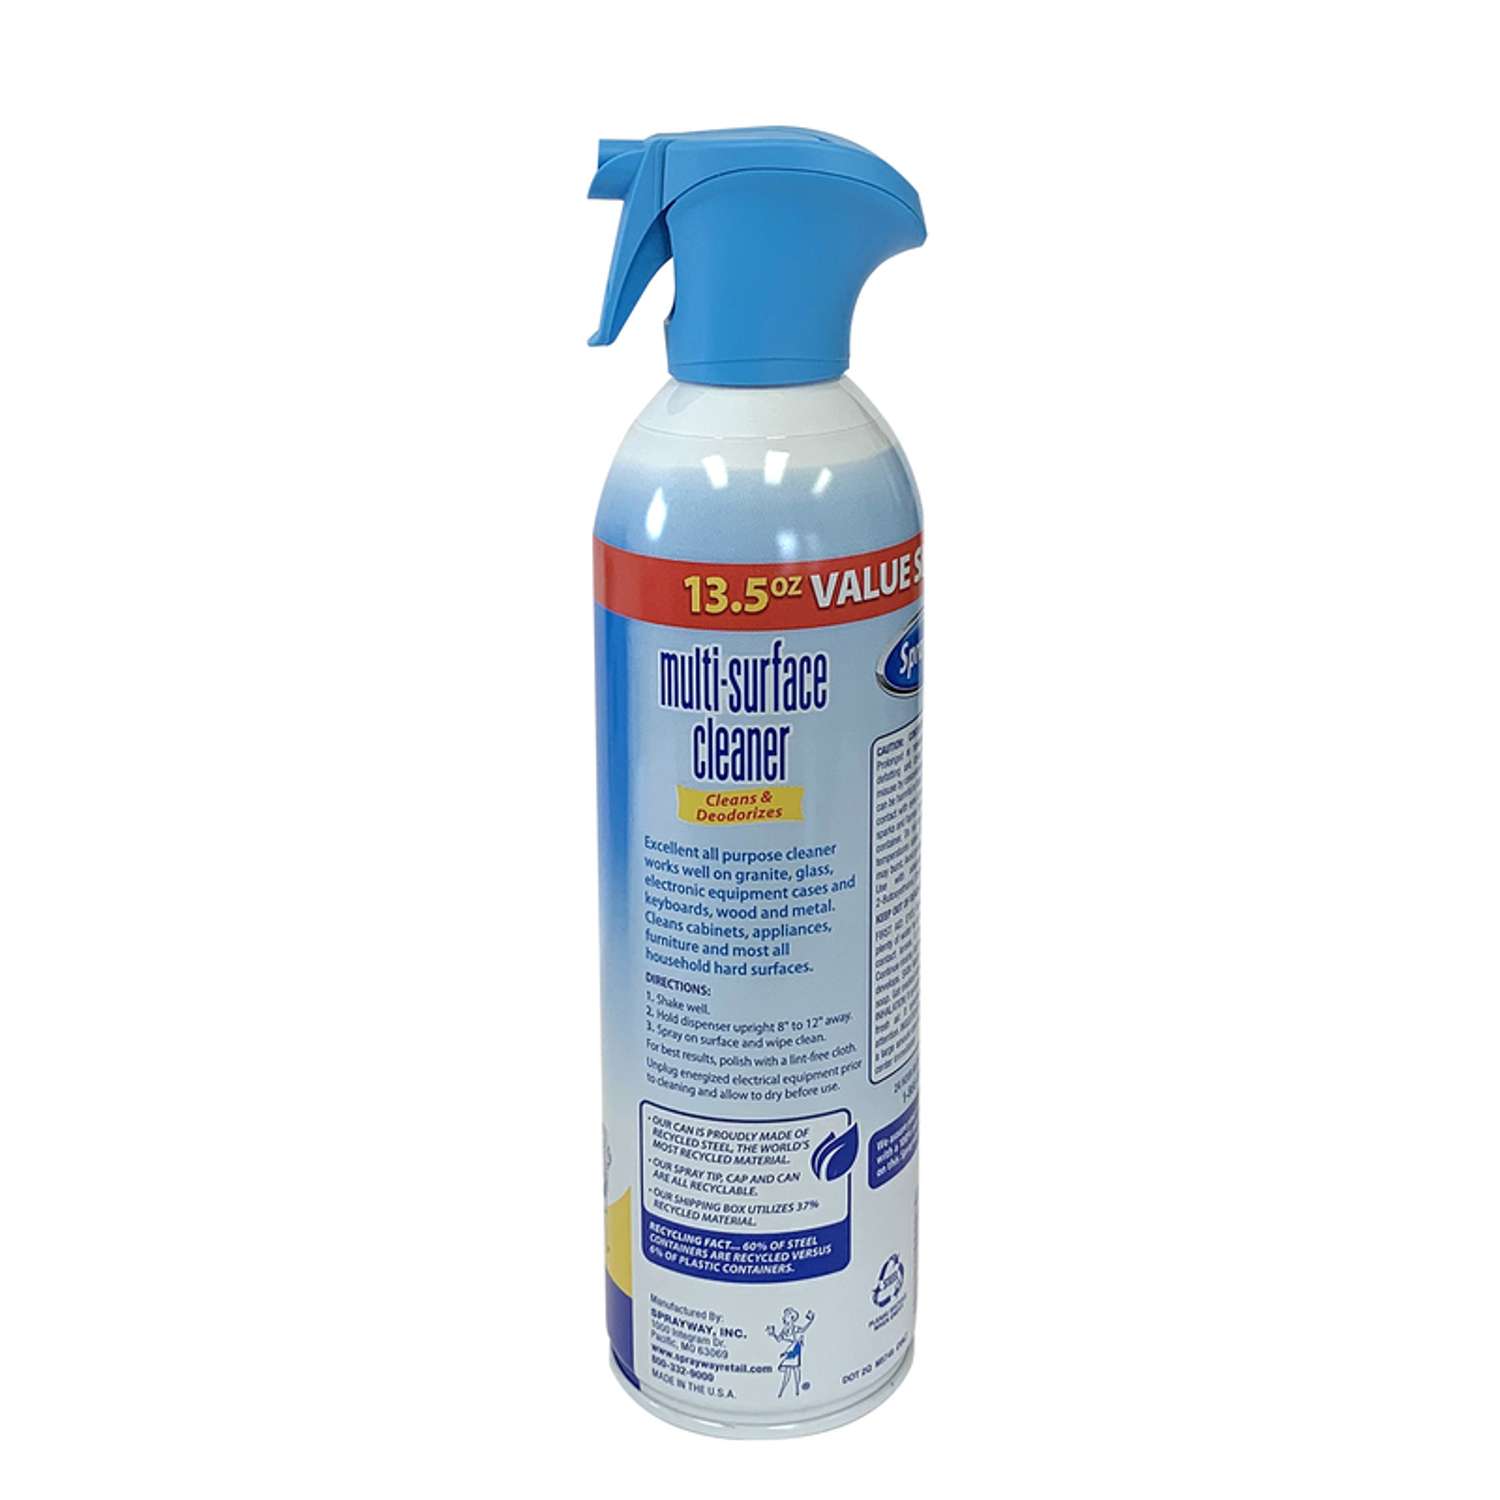 Reviews for Sprayway 23 oz. Glass Cleaner